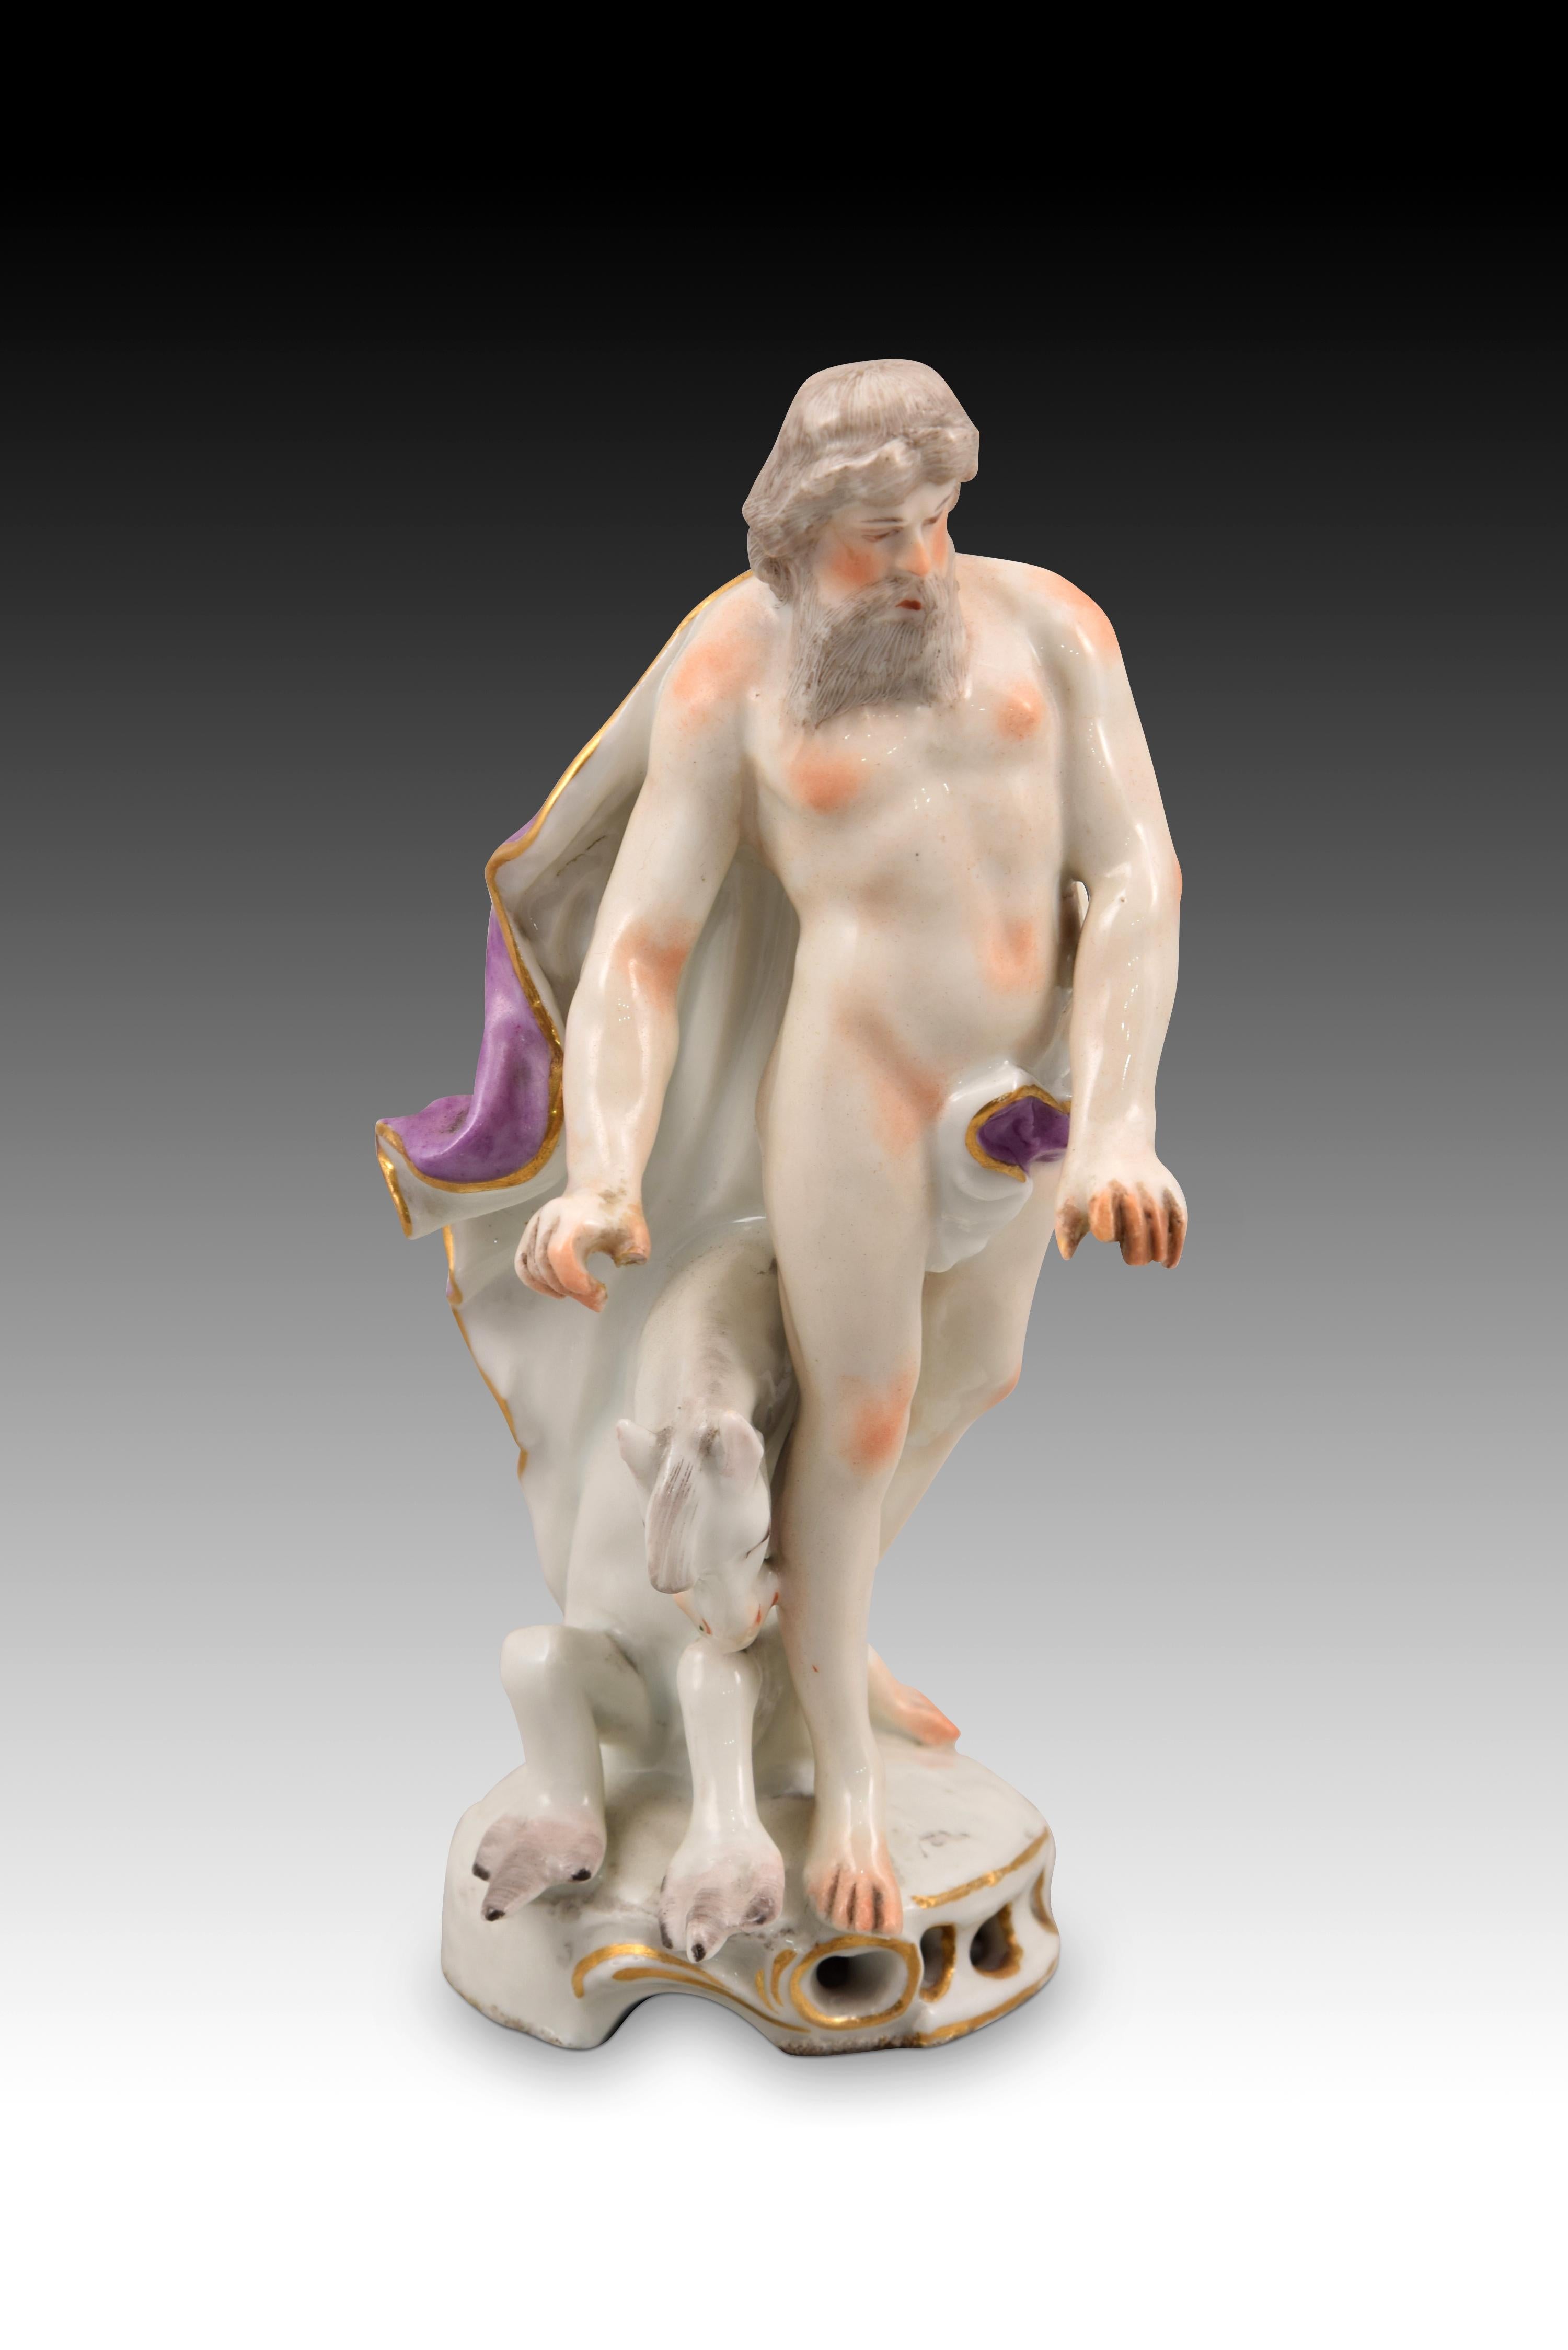 Poseidon or Neptune with hippocampus. Glazed porcelain. Europe, 19th century. 
Enamelled porcelain figurine with a circular base, decorated with openwork elements and rococo-inspired motifs enhanced with golden touches, which presents a semi-nude,